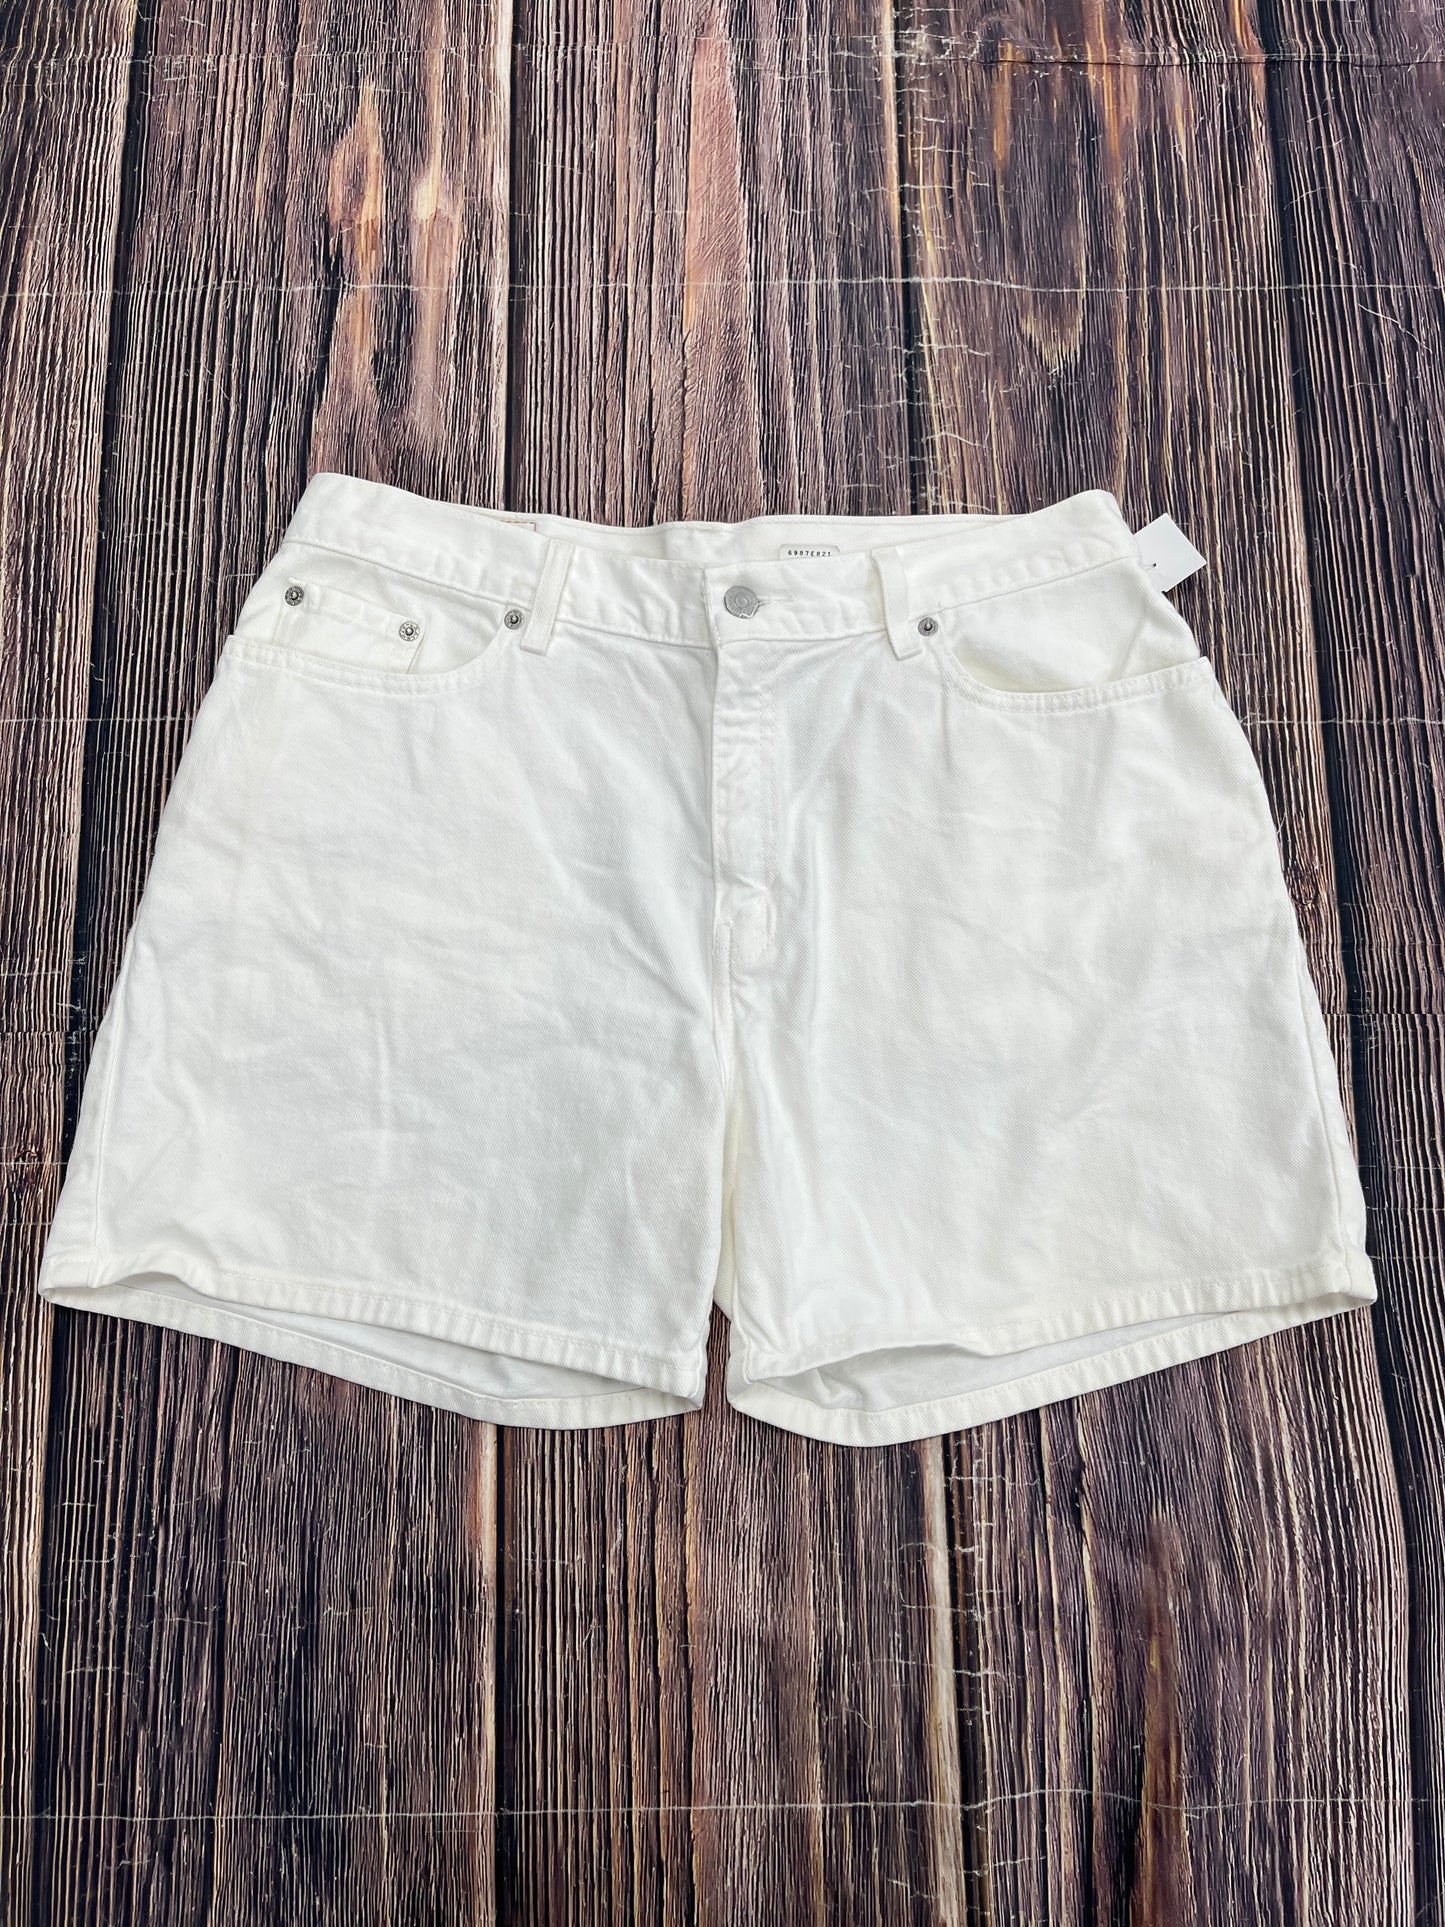 Shorts By Levis  Size: 14